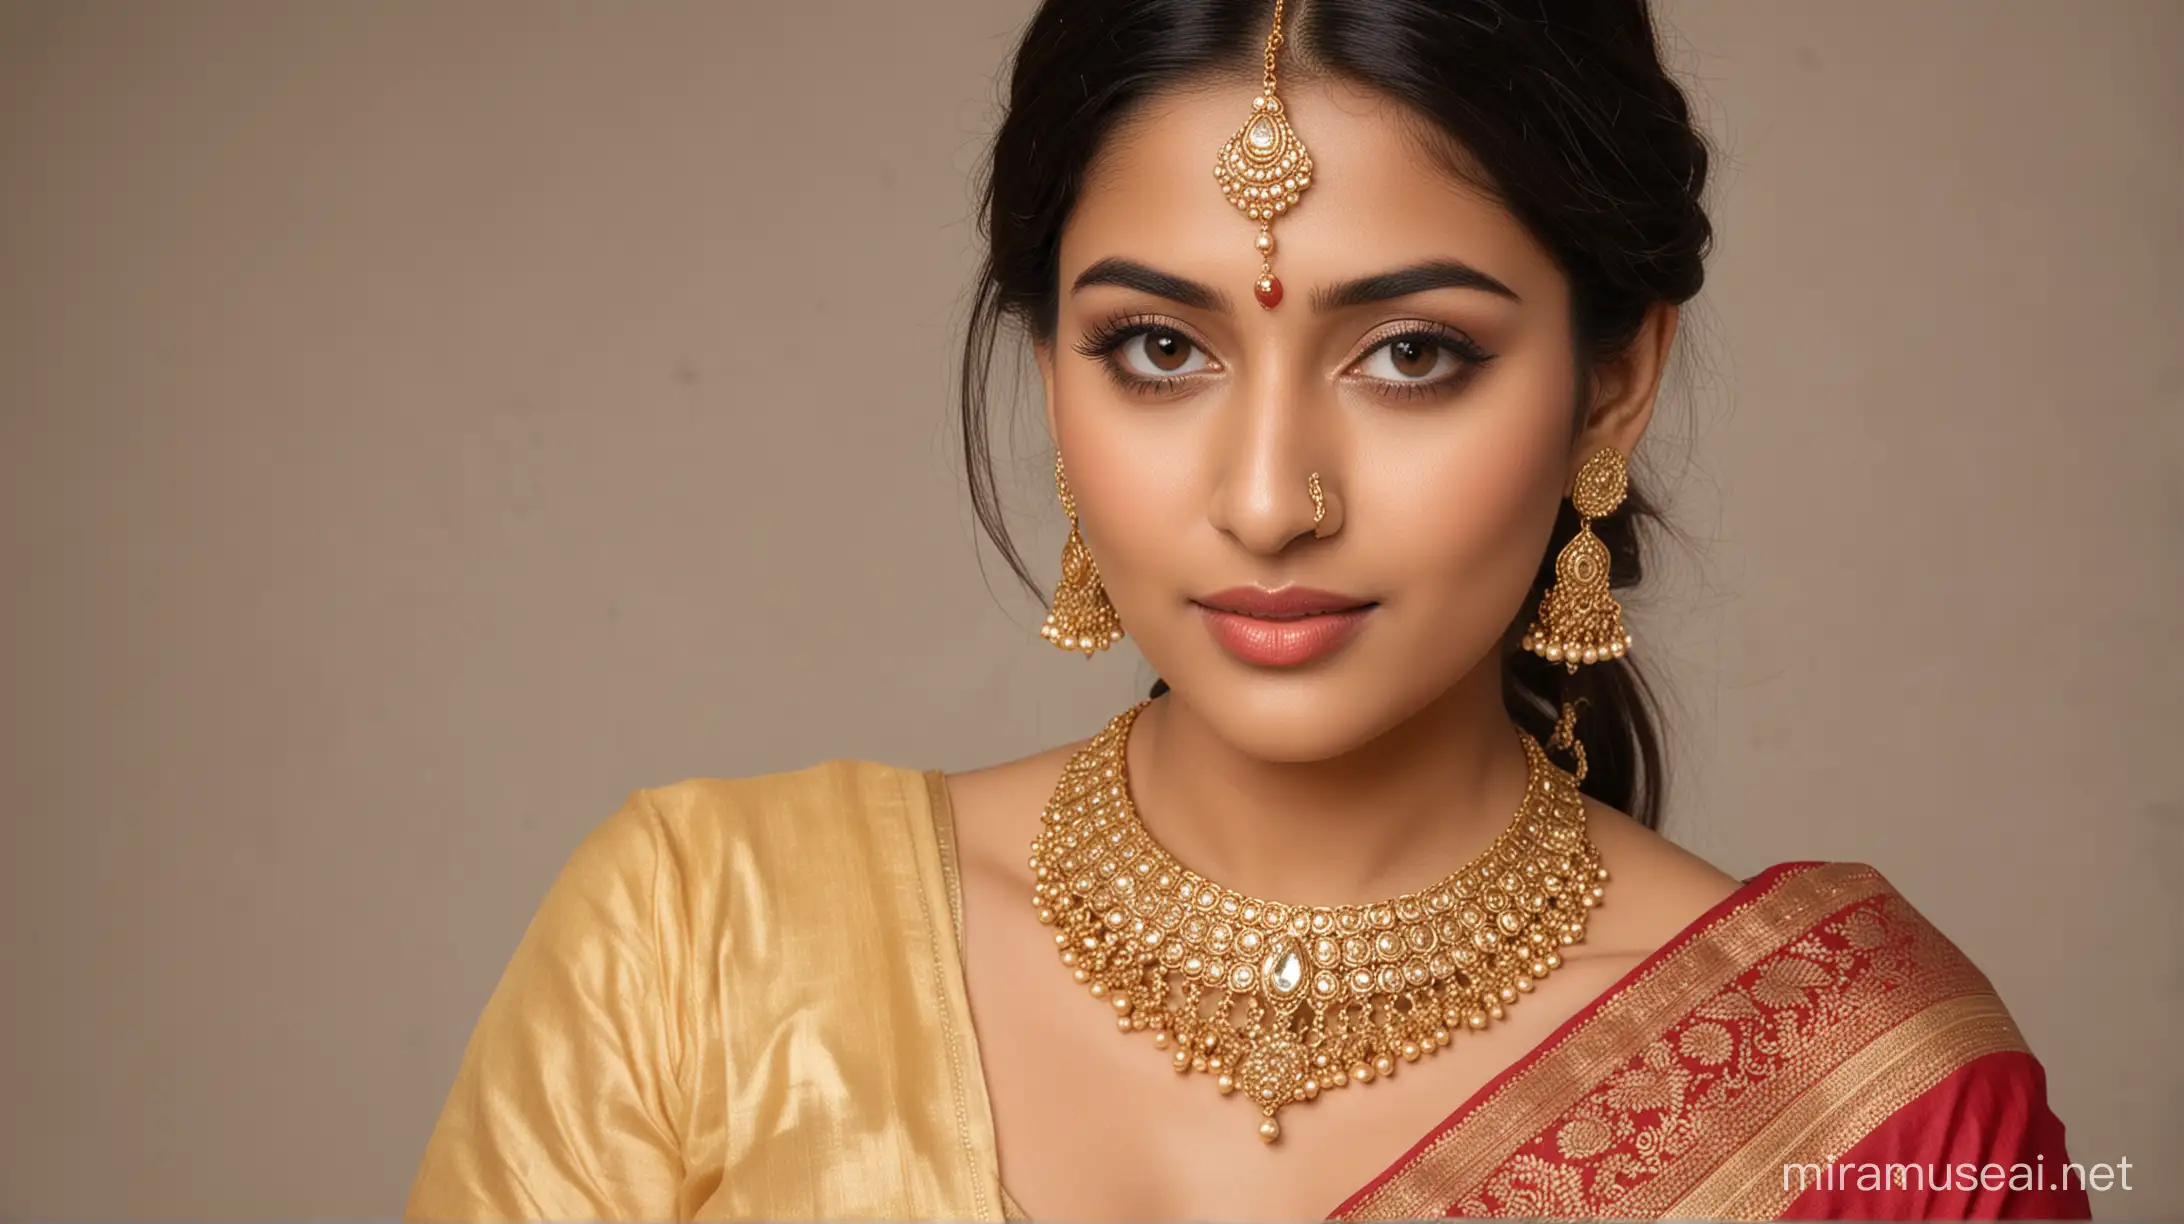 single indian women wearing gold jewellery, necklace, nose ring, bangles in saree